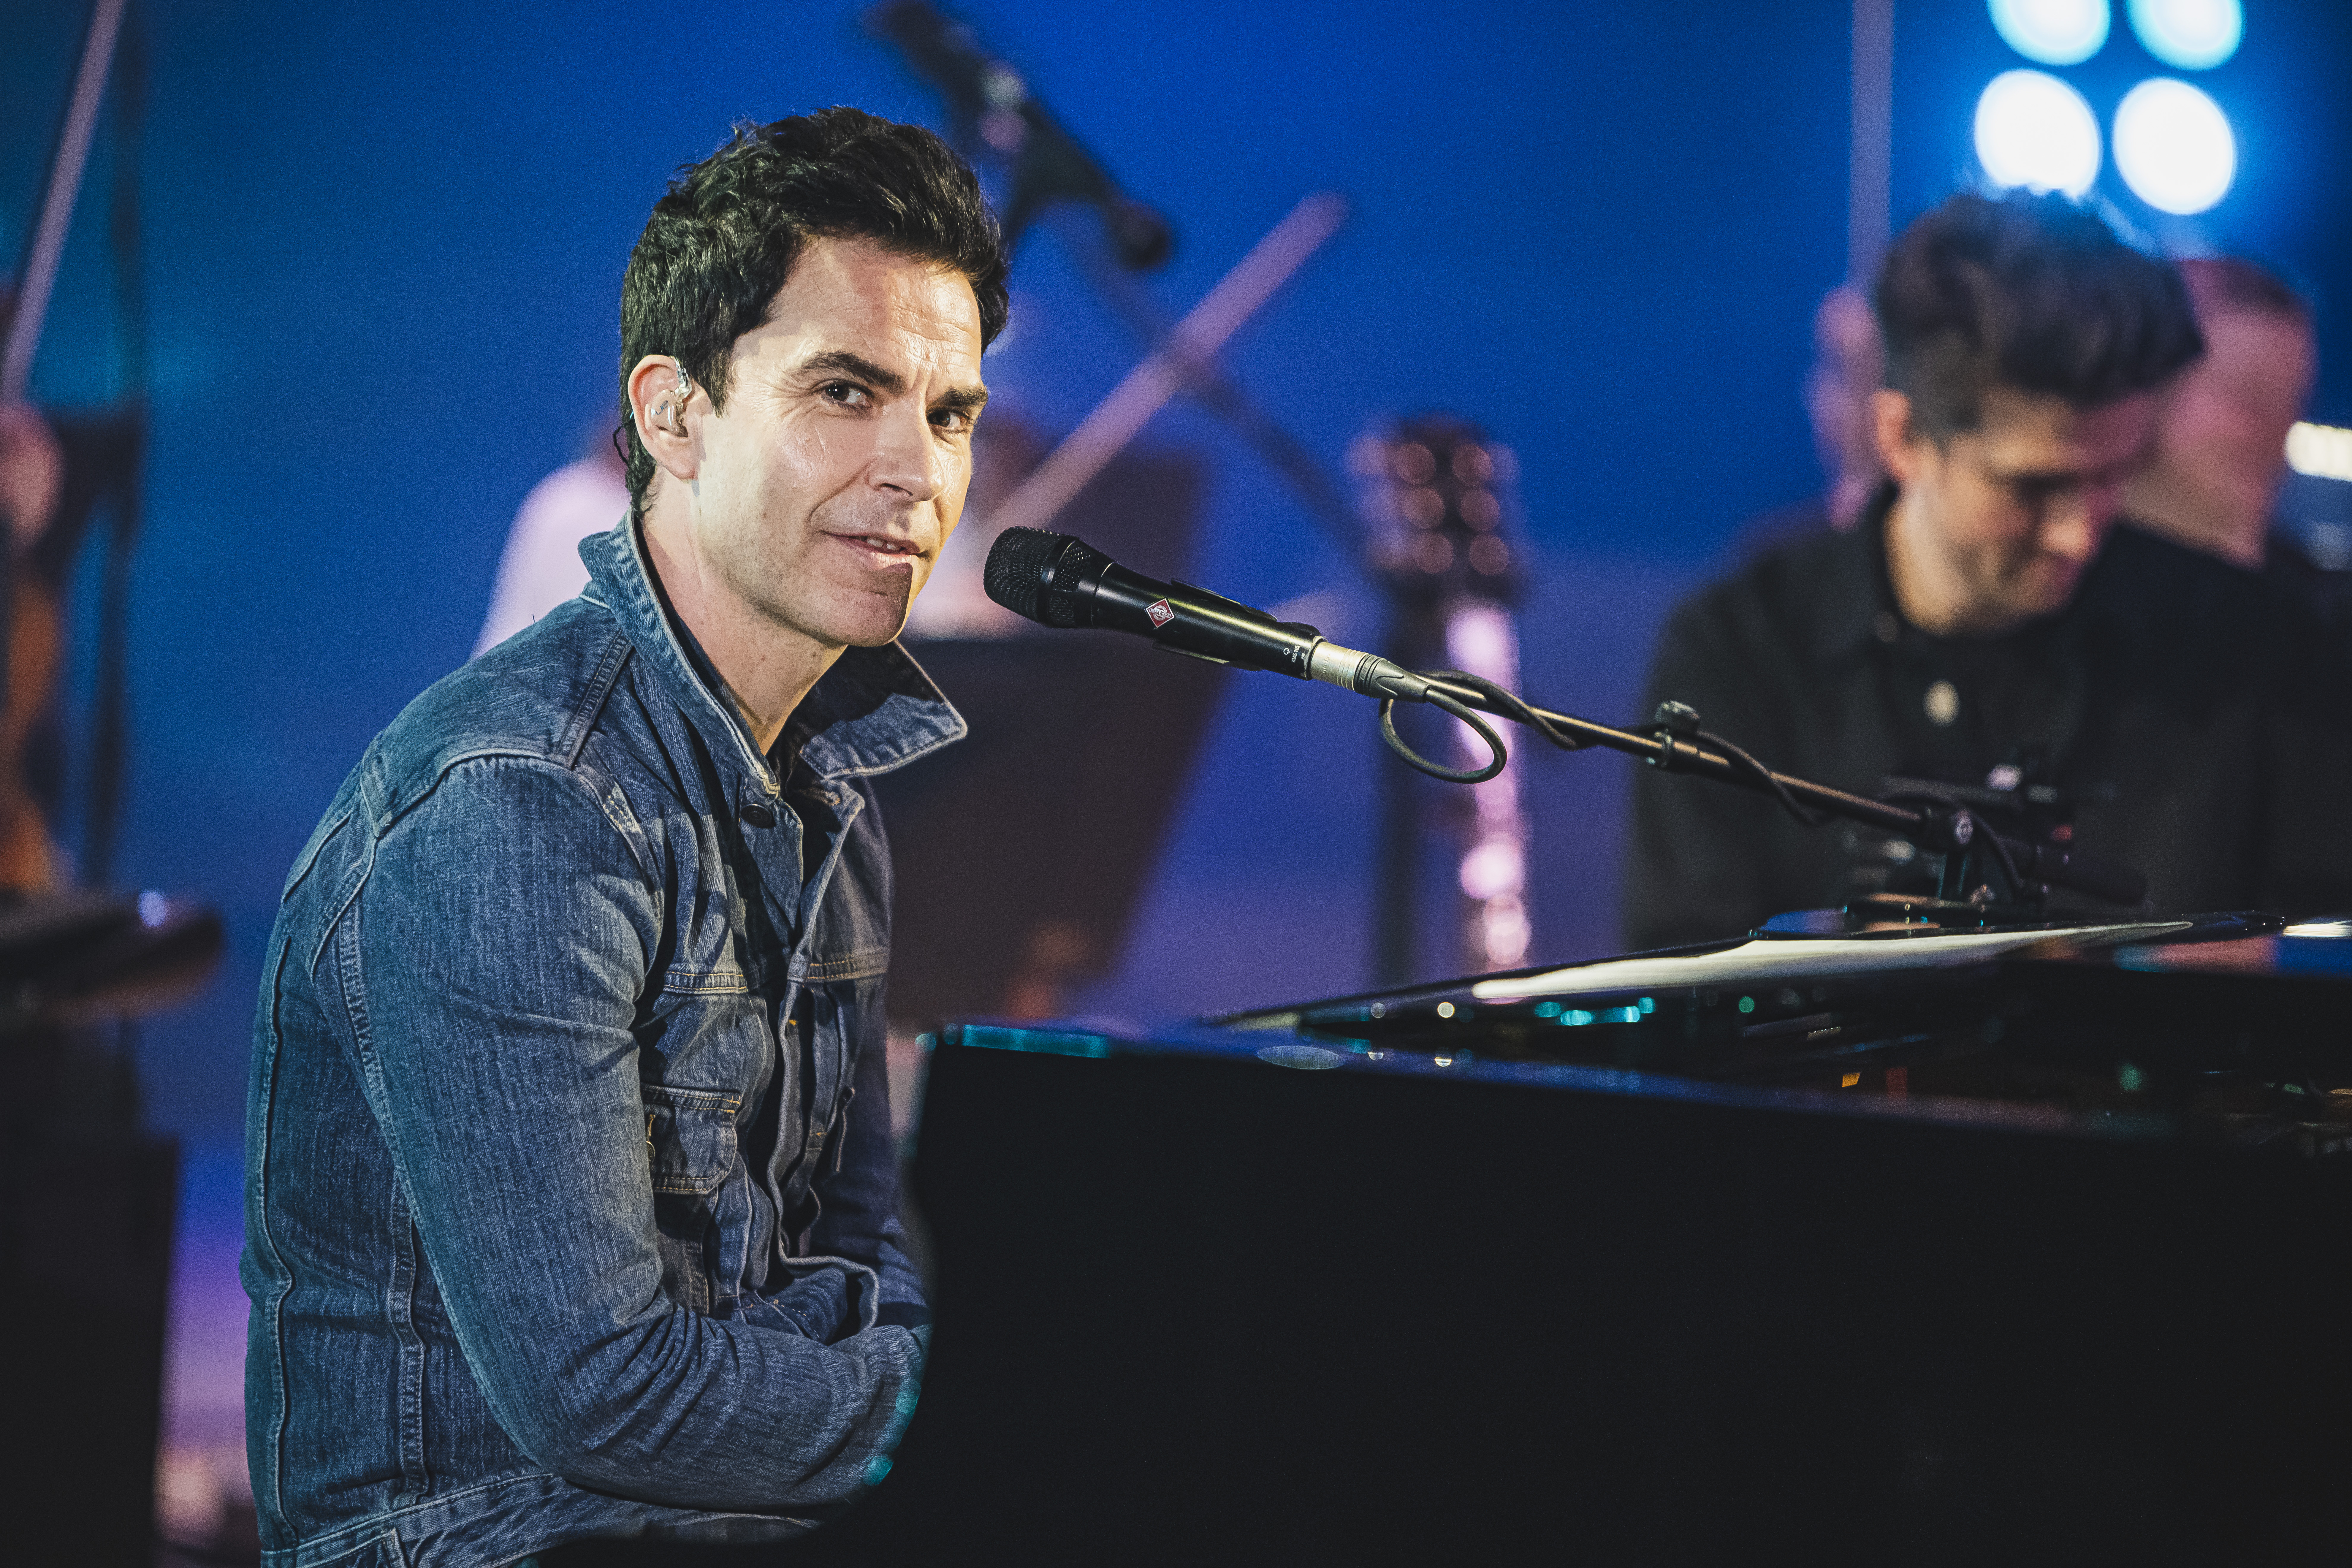 Stereophonics star Kelly Jones has recorded a concert, which will be available on iPlayer, where he plays alongside the National Orchestra of Wales